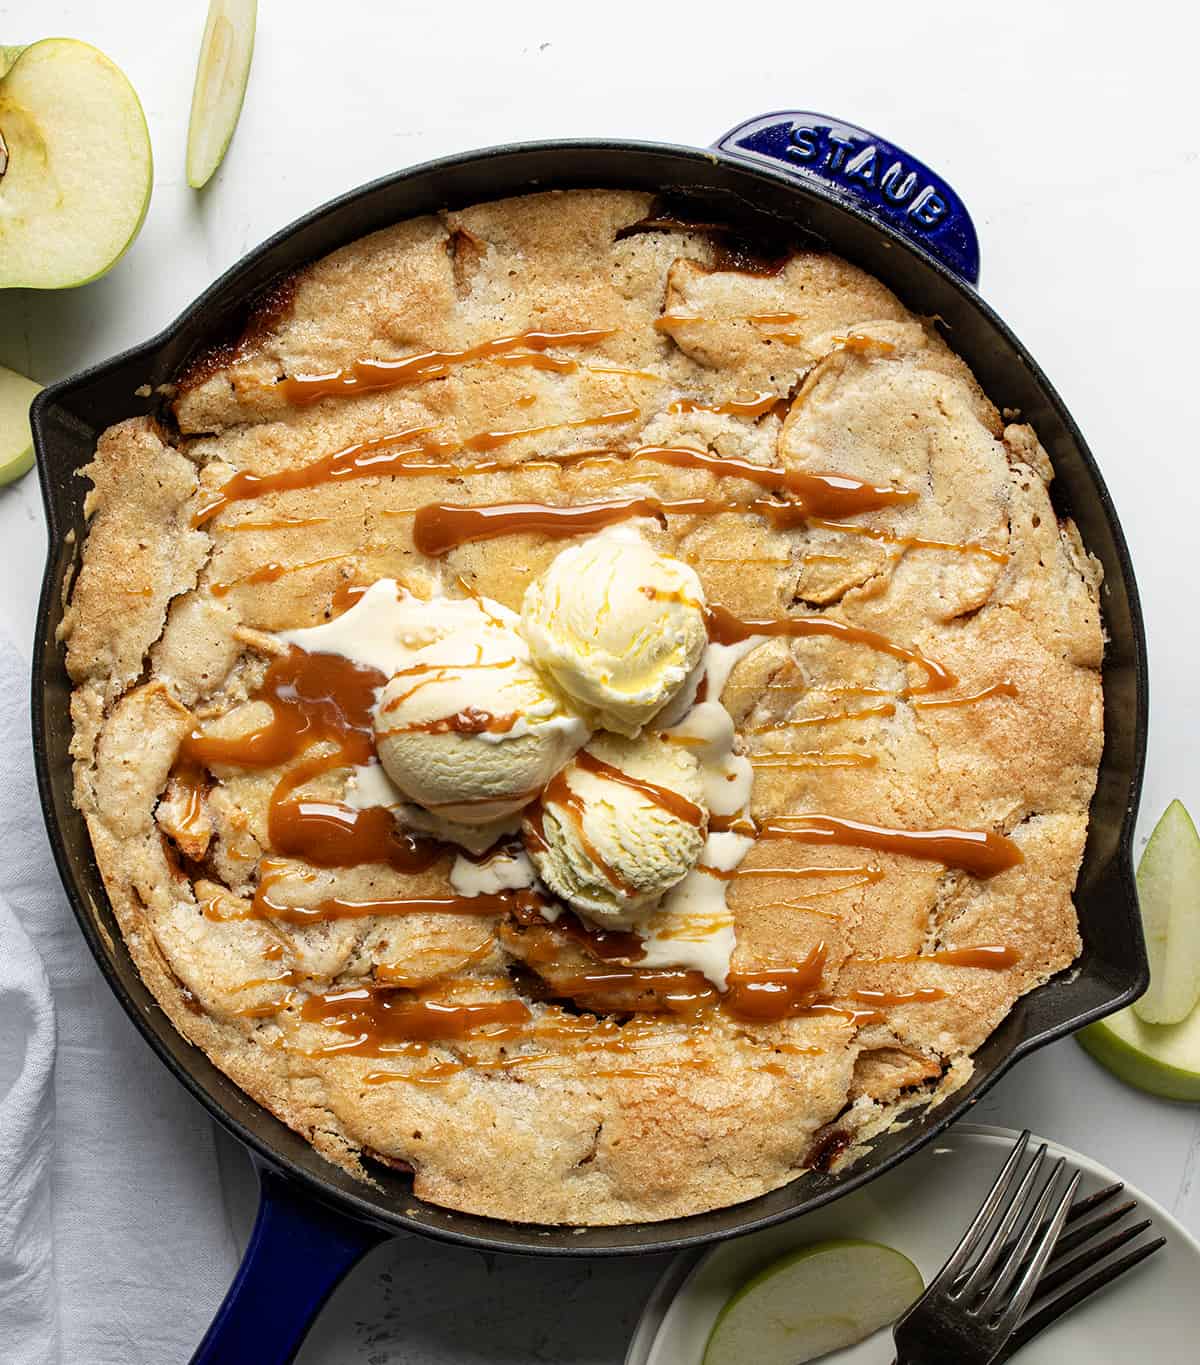 Skillet of Swedish Apple Pie on a White Table With Cut Apples From Overhead.